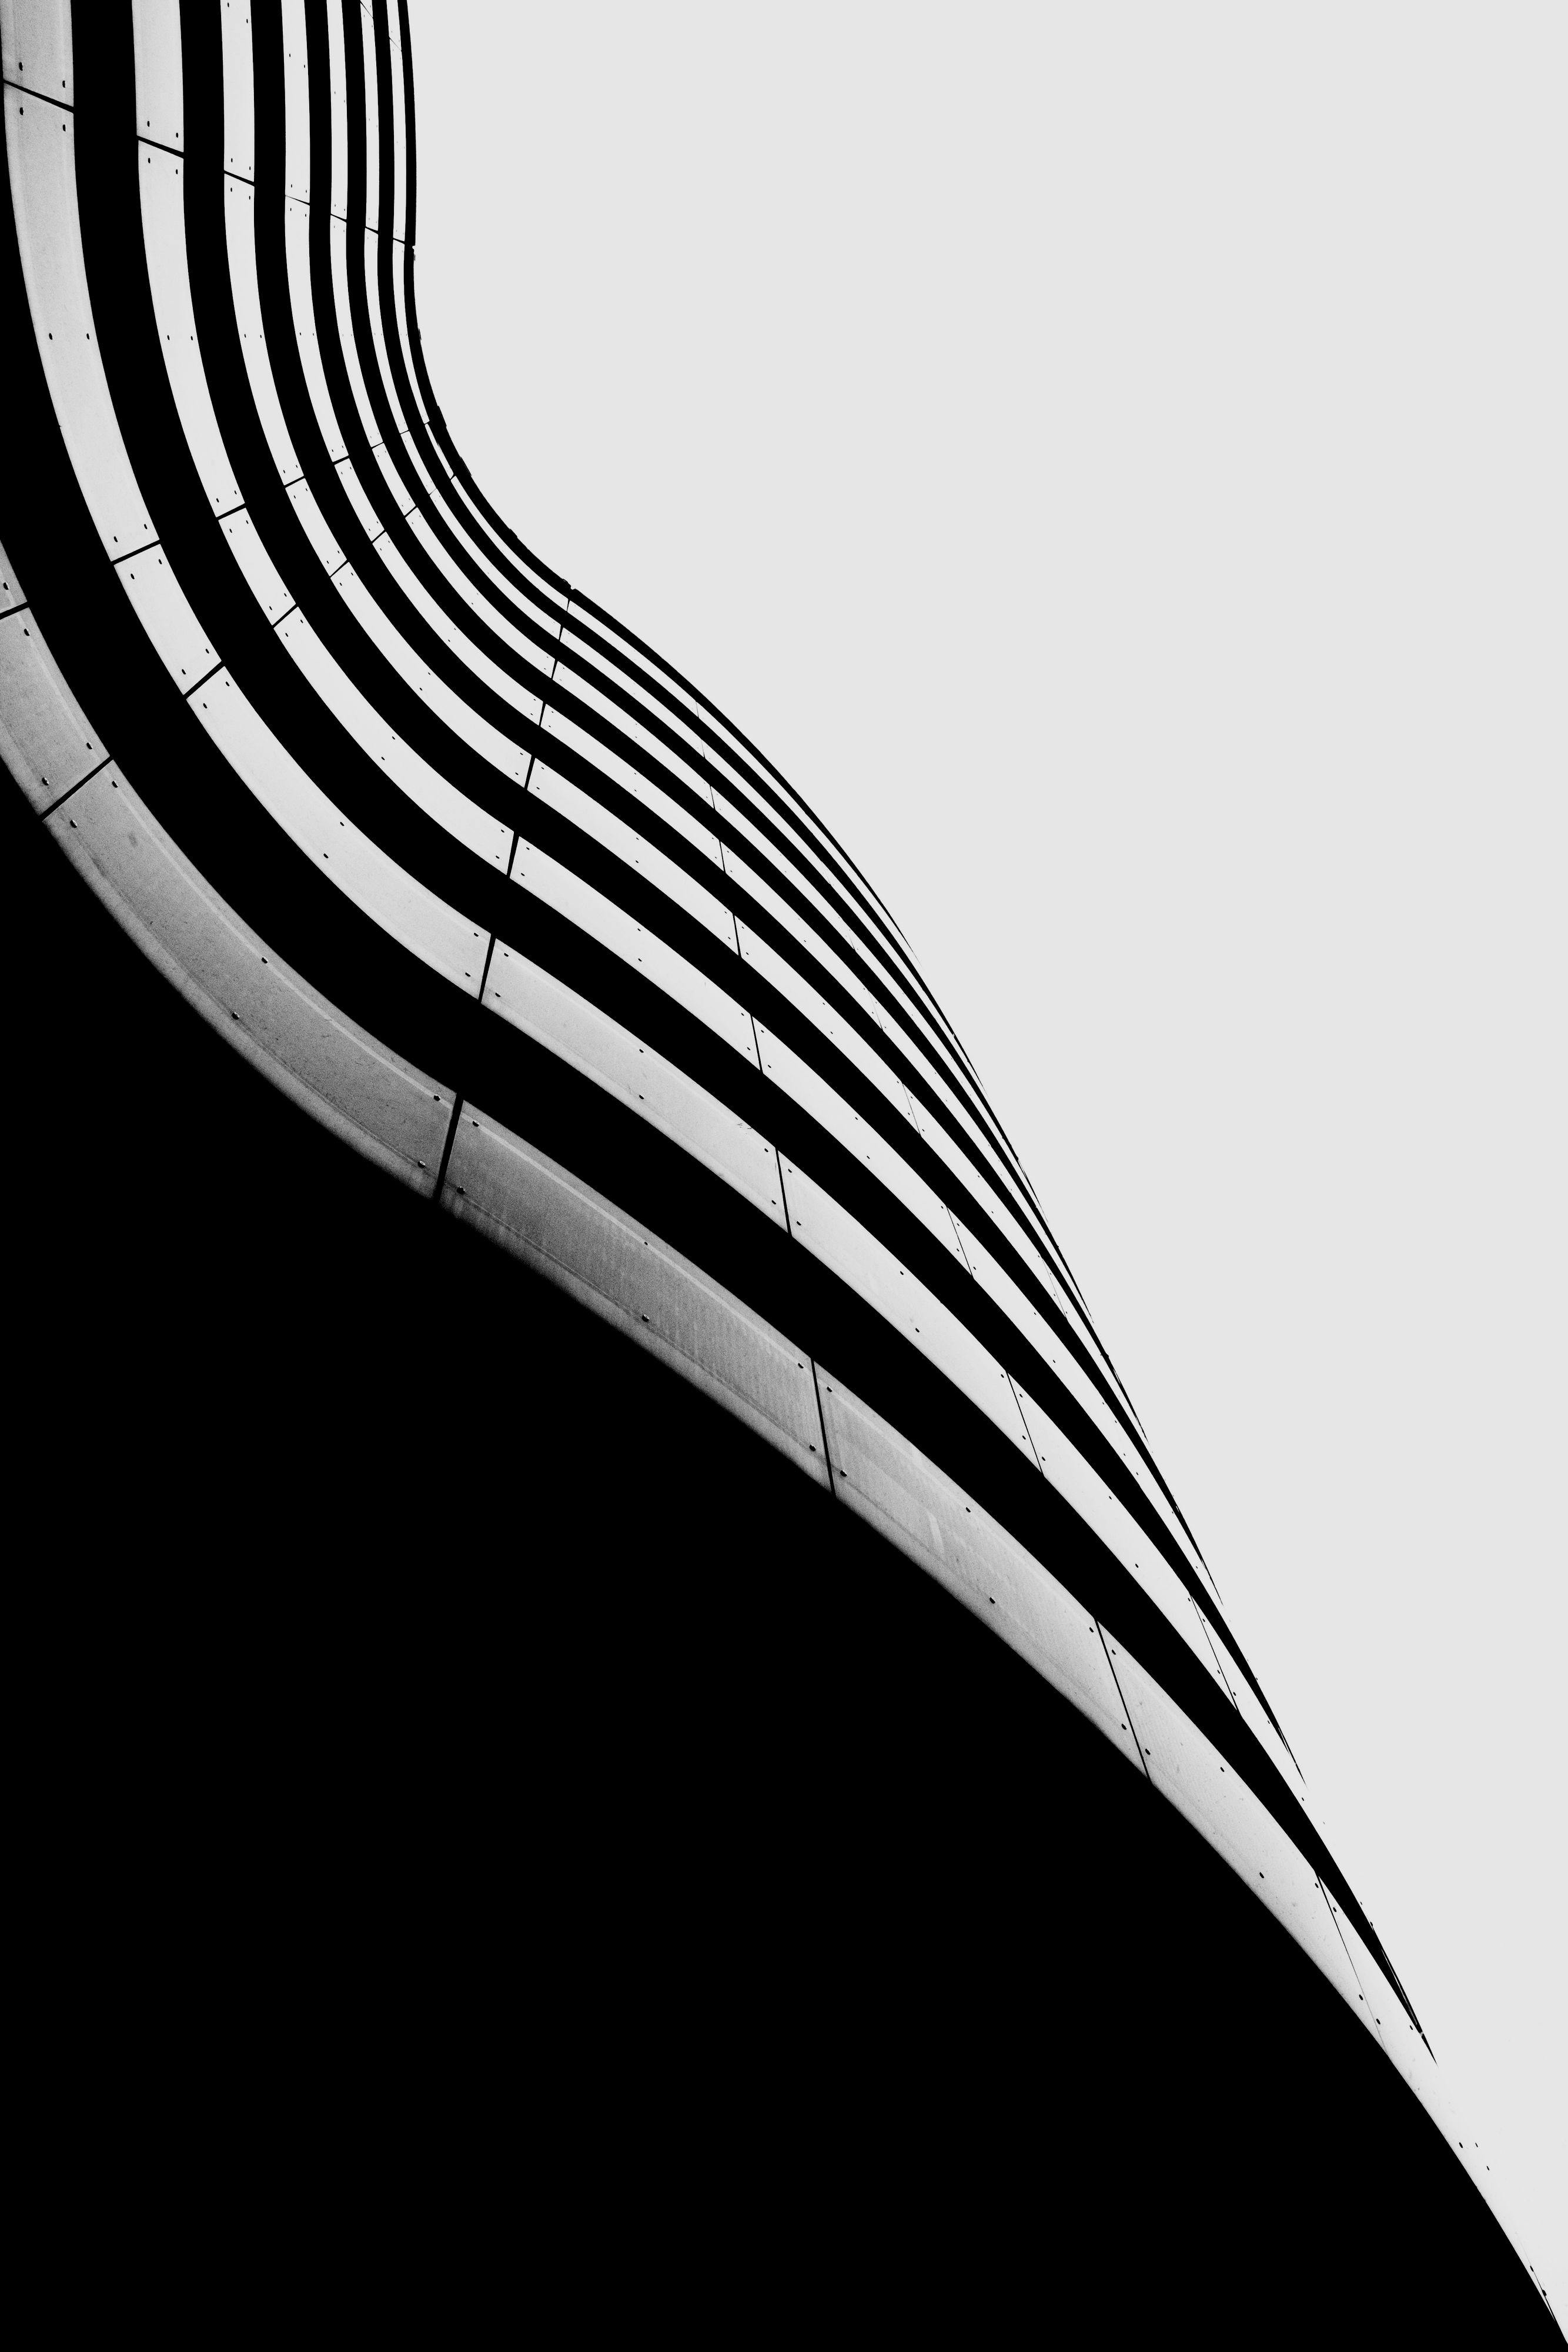 A curved building surface with sky